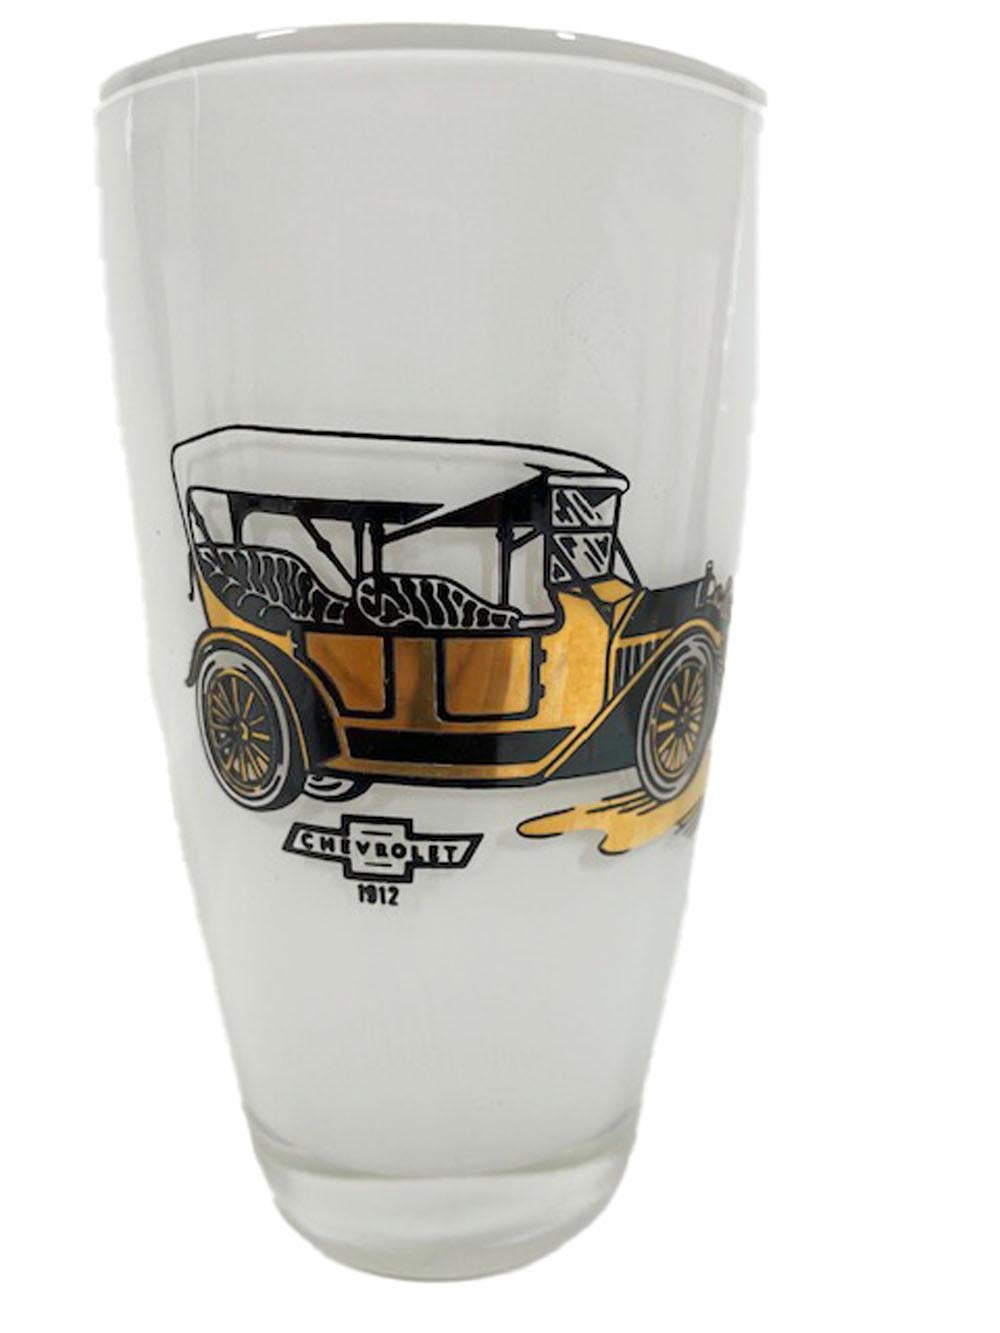 American Vintage Highball Glasses with Images of Antique Automobiles by Gay Fad For Sale